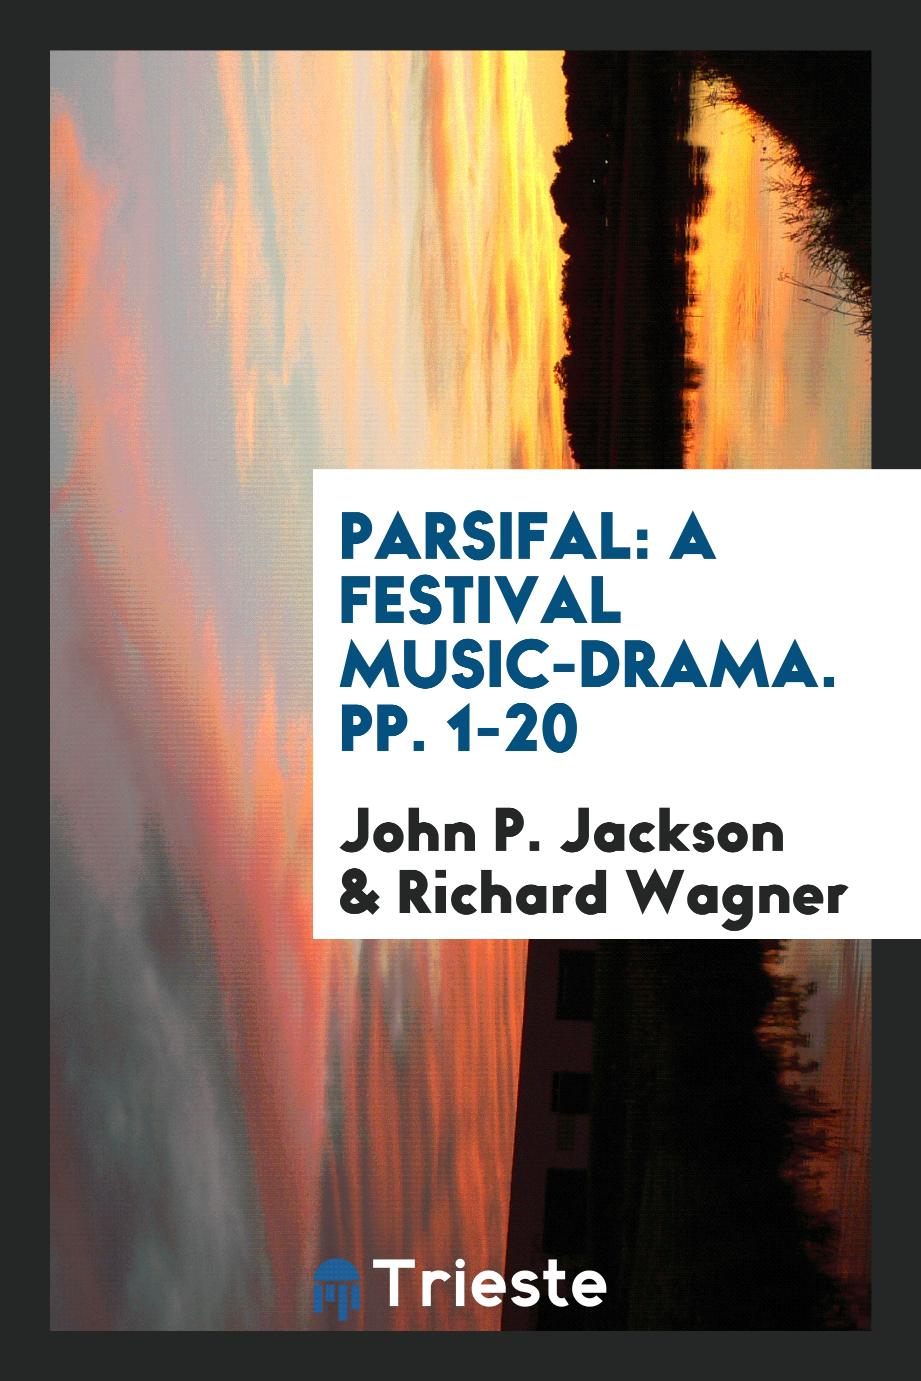 Parsifal: A Festival Music-drama. pp. 1-20